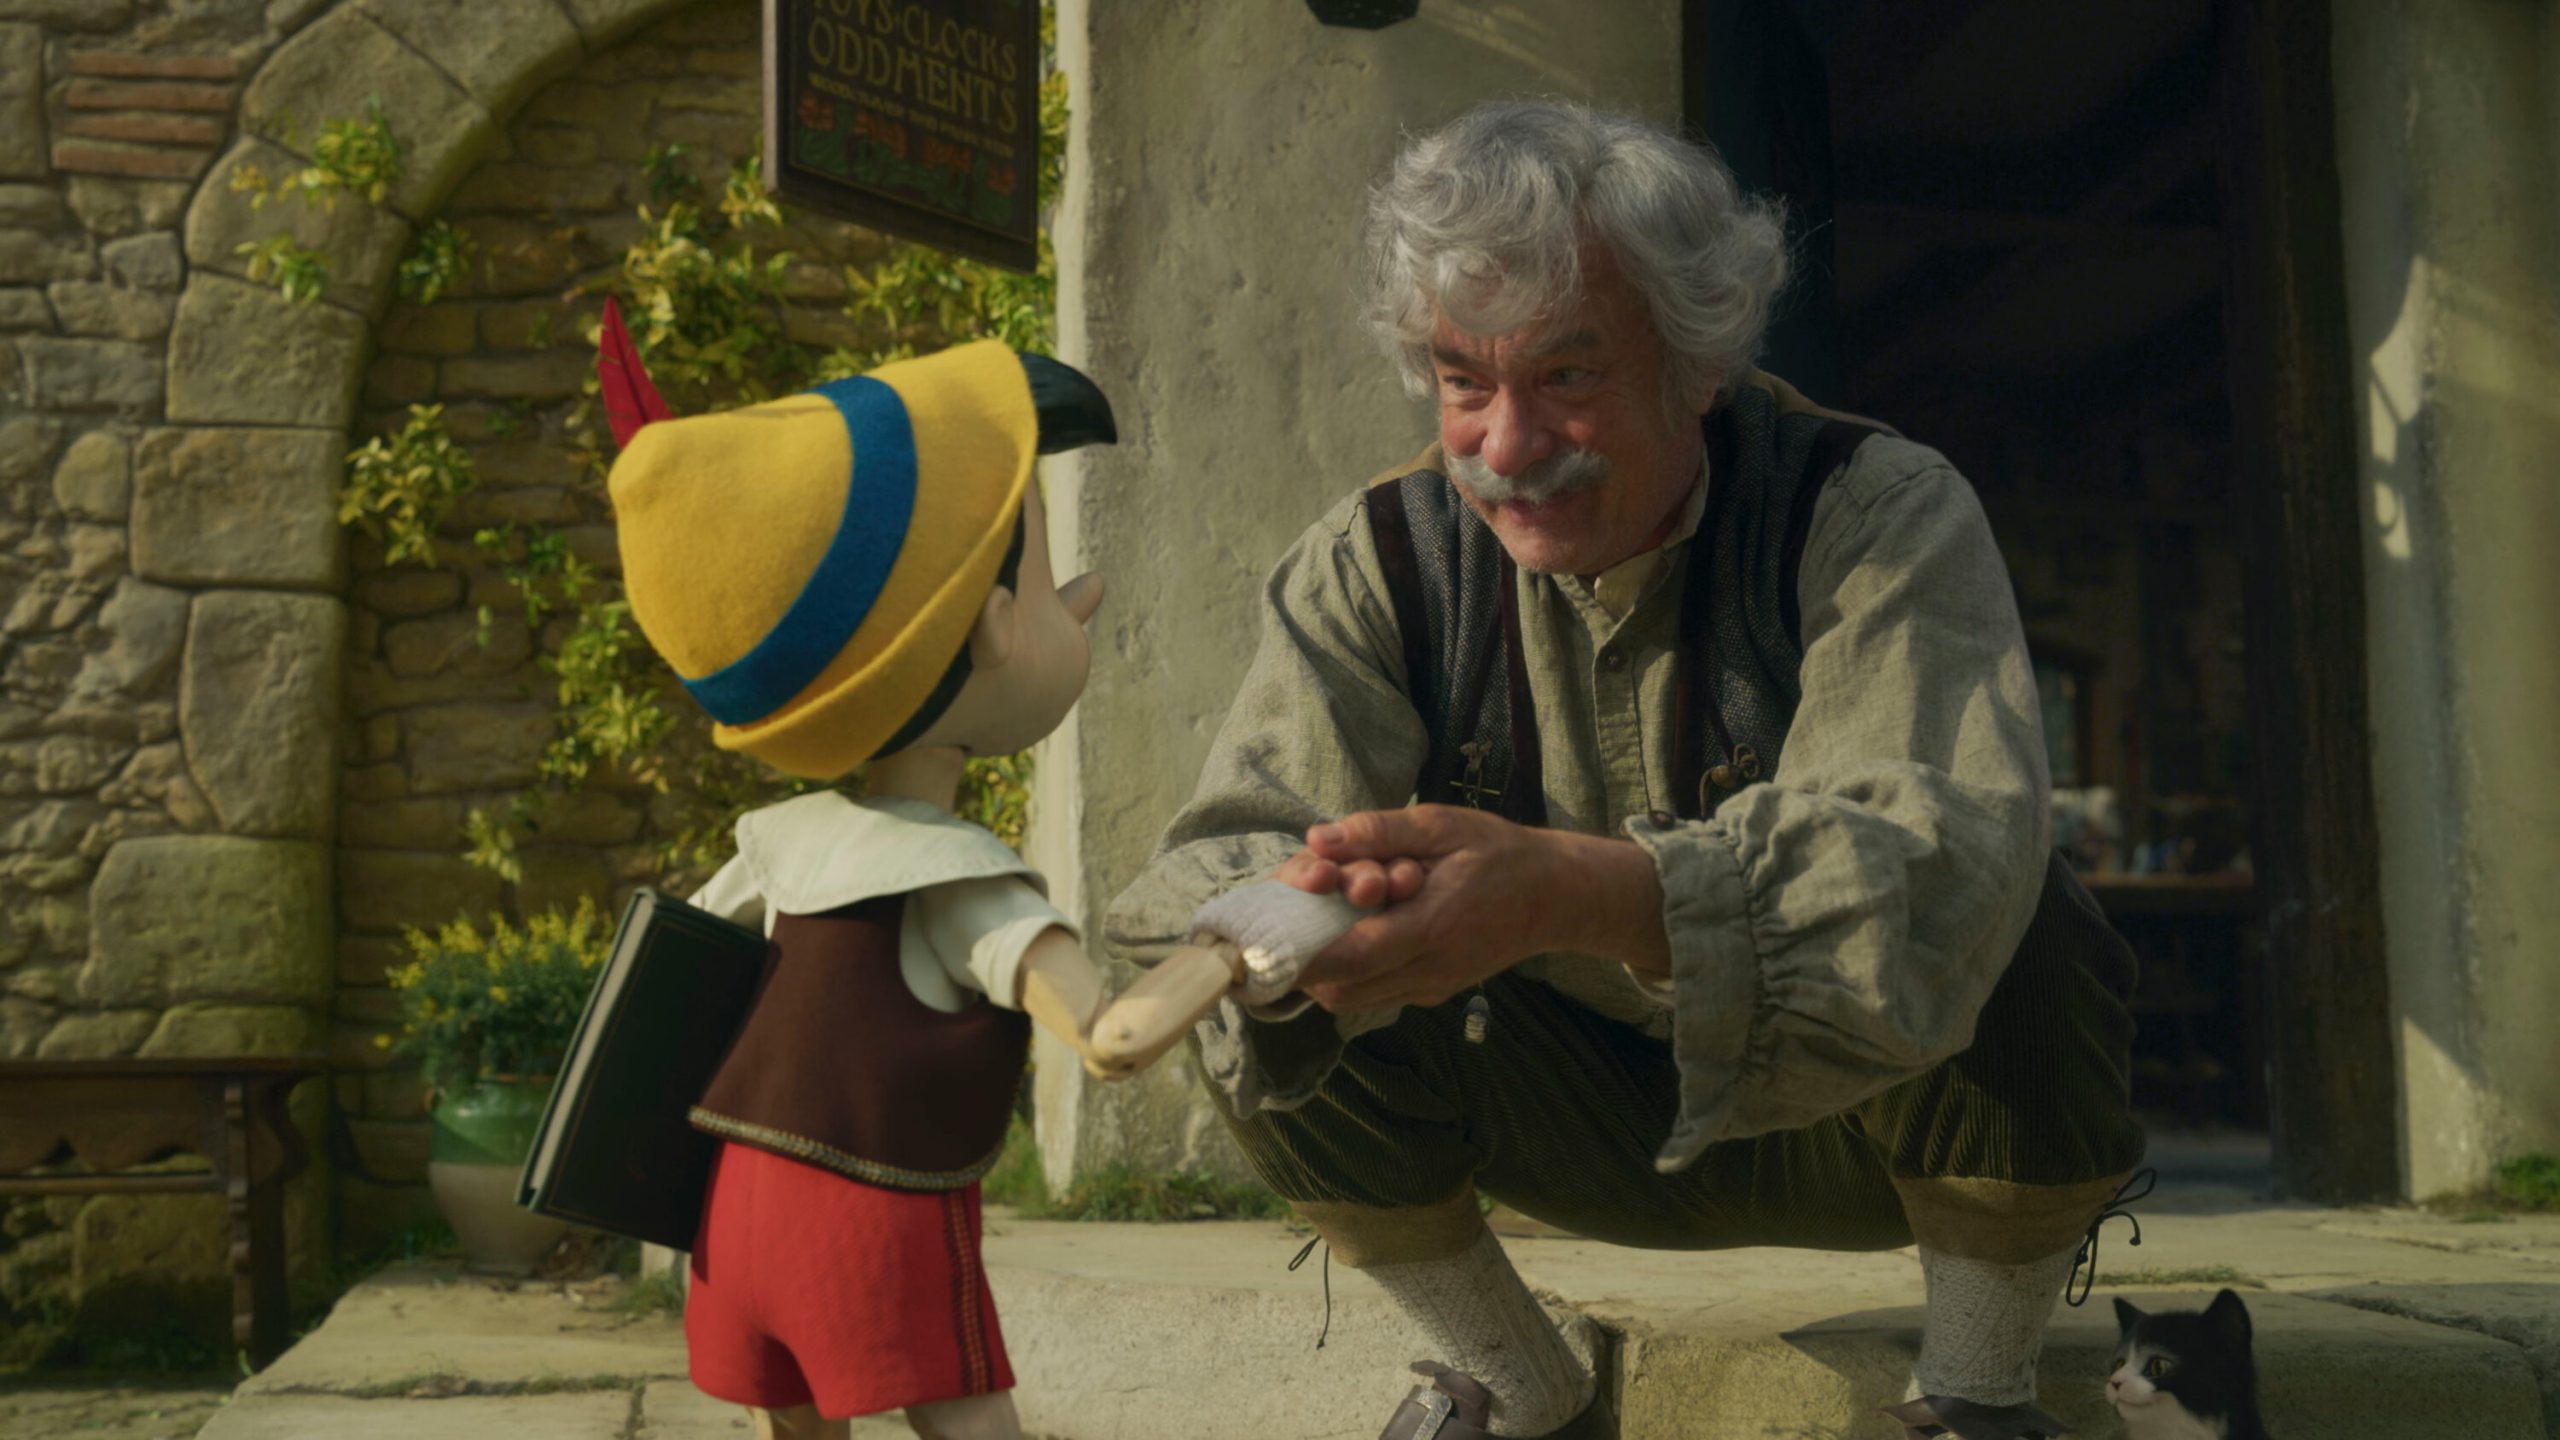 The 2022 live-action 'Pinocchio' has a questionable song